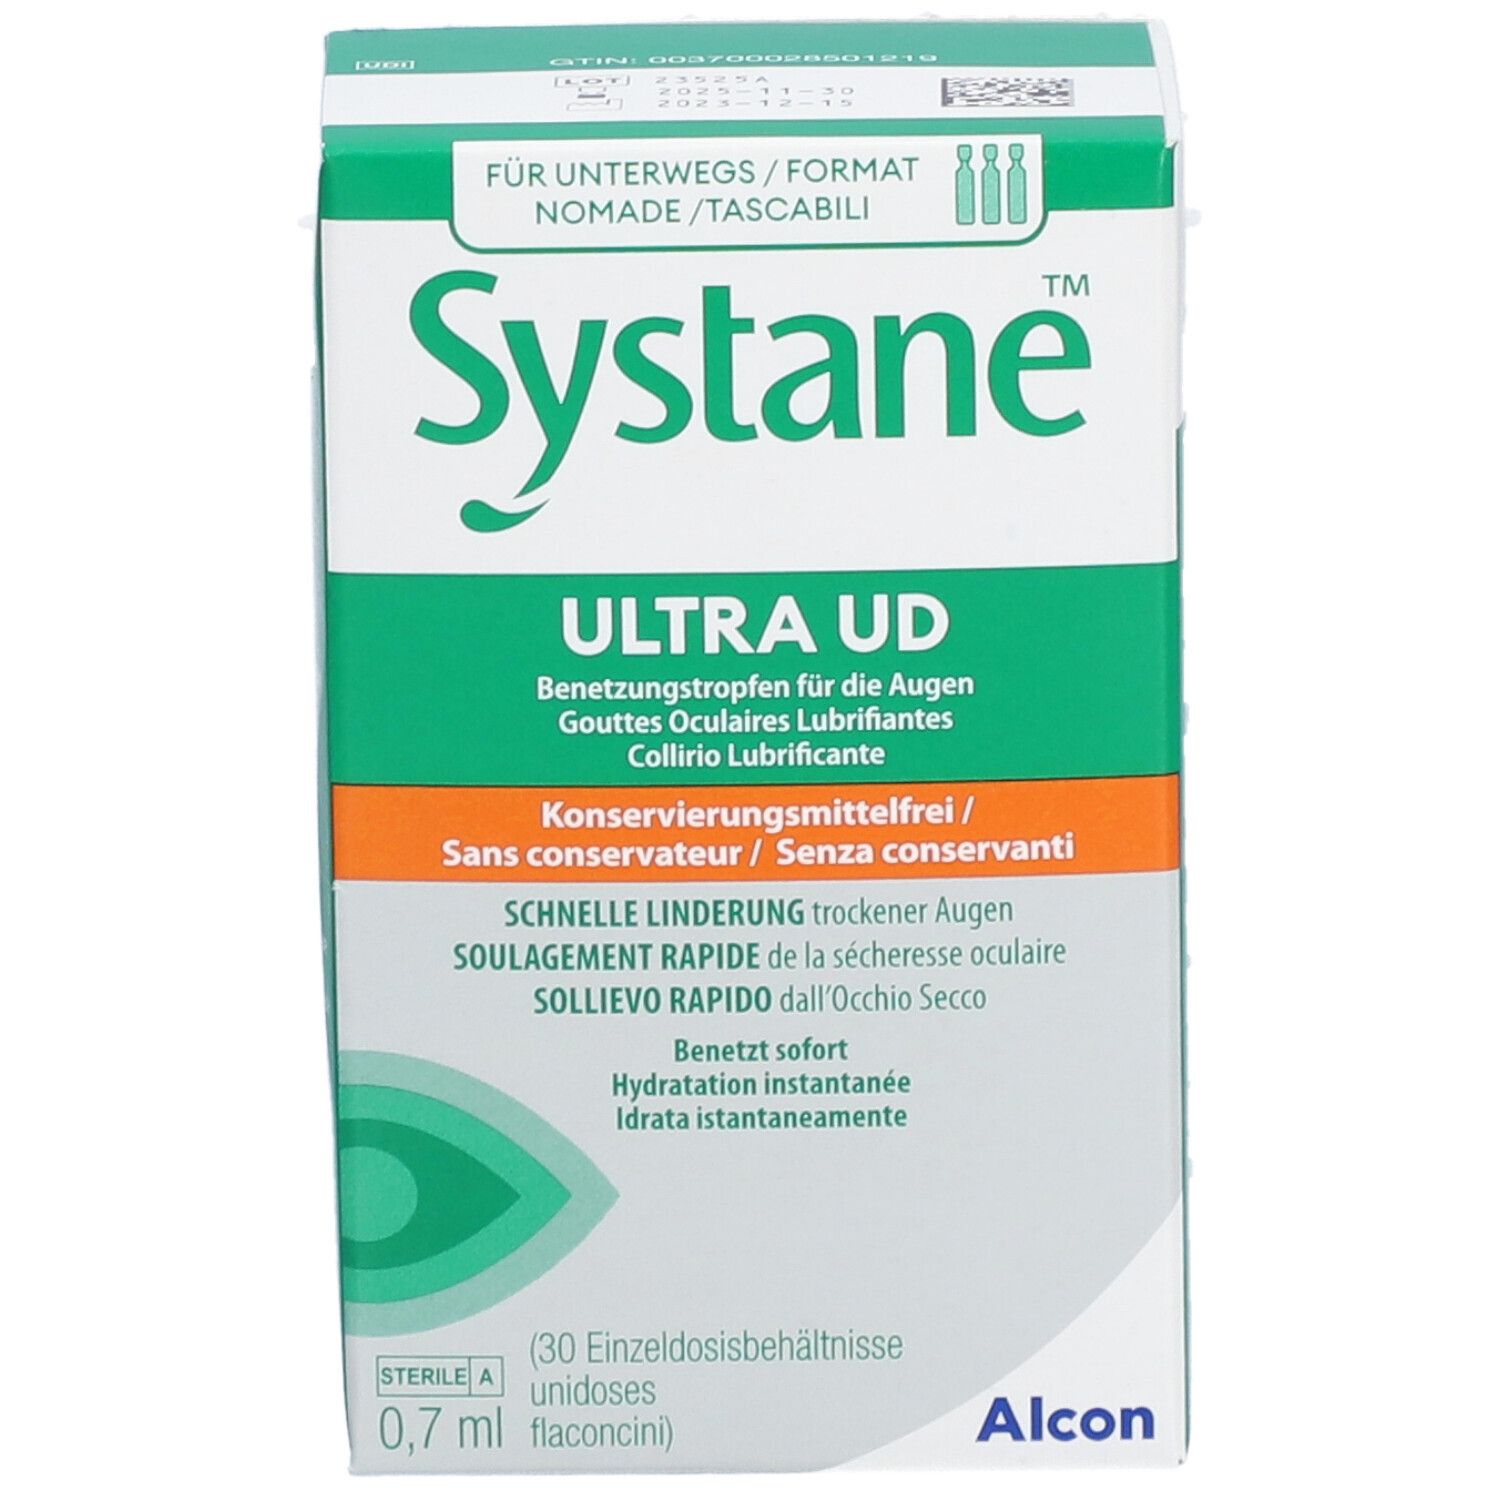 Systane® Ultra UD